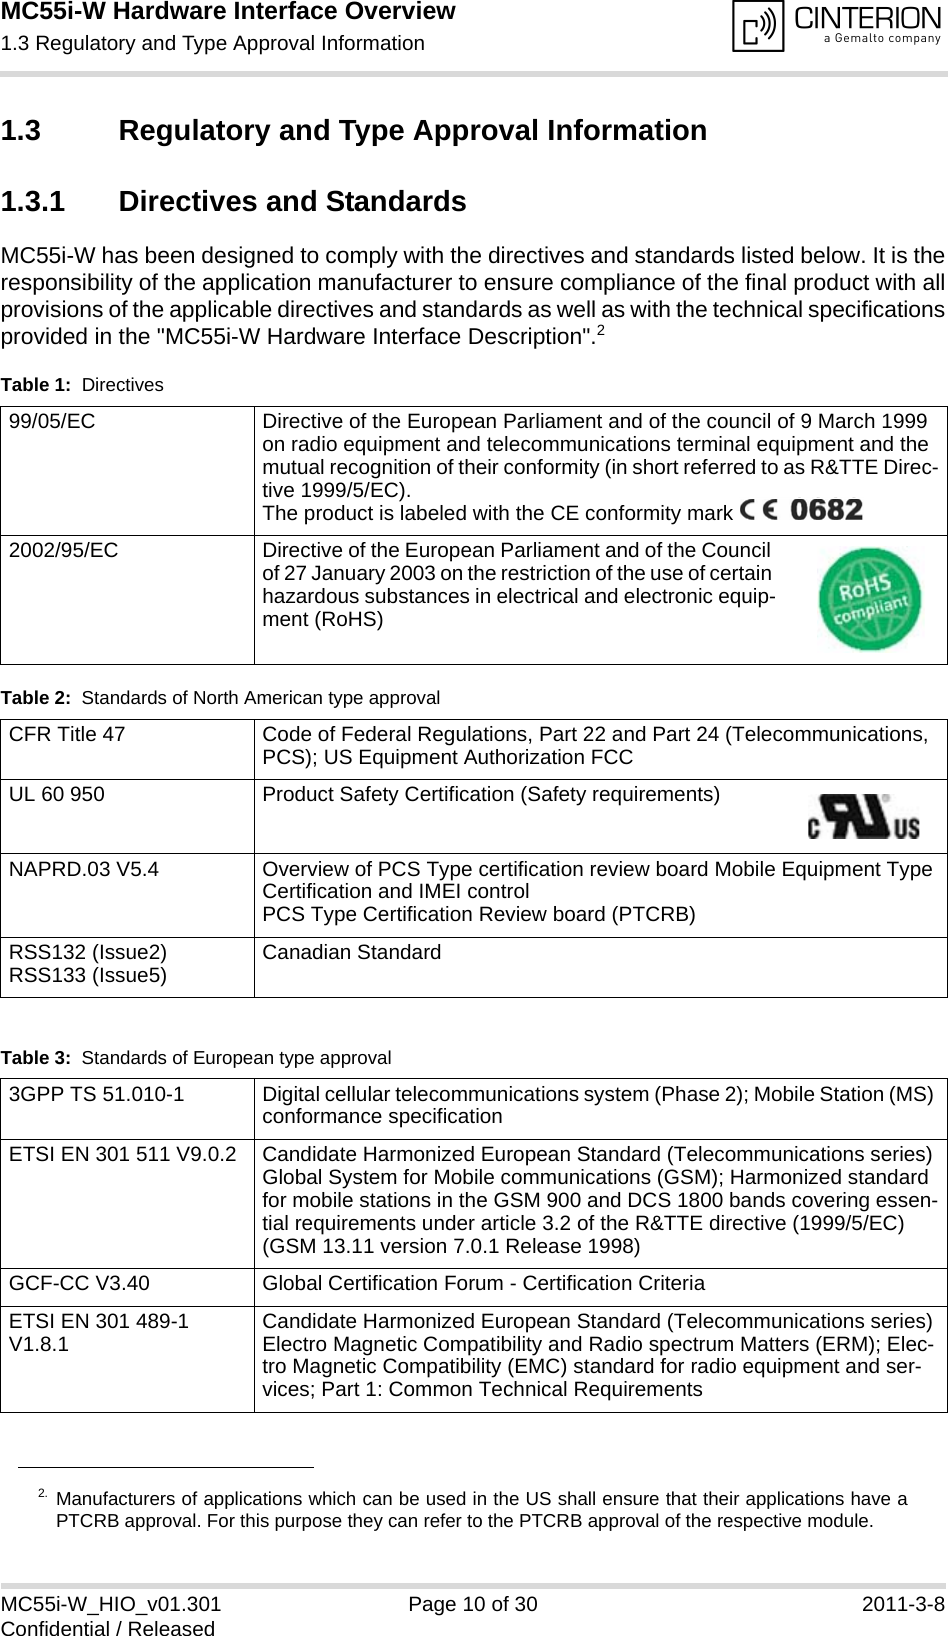 MC55i-W Hardware Interface Overview1.3 Regulatory and Type Approval Information14MC55i-W_HIO_v01.301 Page 10 of 30 2011-3-8Confidential / Released1.3 Regulatory and Type Approval Information1.3.1 Directives and StandardsMC55i-W has been designed to comply with the directives and standards listed below. It is theresponsibility of the application manufacturer to ensure compliance of the final product with allprovisions of the applicable directives and standards as well as with the technical specificationsprovided in the &quot;MC55i-W Hardware Interface Description&quot;.22. Manufacturers of applications which can be used in the US shall ensure that their applications have aPTCRB approval. For this purpose they can refer to the PTCRB approval of the respective module. Table 1:  Directives99/05/EC Directive of the European Parliament and of the council of 9 March 1999 on radio equipment and telecommunications terminal equipment and the mutual recognition of their conformity (in short referred to as R&amp;TTE Direc-tive 1999/5/EC).The product is labeled with the CE conformity mark 2002/95/EC  Directive of the European Parliament and of the Council of 27 January 2003 on the restriction of the use of certain hazardous substances in electrical and electronic equip-ment (RoHS)Table 2:  Standards of North American type approvalCFR Title 47 Code of Federal Regulations, Part 22 and Part 24 (Telecommunications, PCS); US Equipment Authorization FCCUL 60 950 Product Safety Certification (Safety requirements)NAPRD.03 V5.4 Overview of PCS Type certification review board Mobile Equipment Type Certification and IMEI controlPCS Type Certification Review board (PTCRB)RSS132 (Issue2)RSS133 (Issue5) Canadian StandardTable 3:  Standards of European type approval3GPP TS 51.010-1 Digital cellular telecommunications system (Phase 2); Mobile Station (MS) conformance specificationETSI EN 301 511 V9.0.2 Candidate Harmonized European Standard (Telecommunications series) Global System for Mobile communications (GSM); Harmonized standard for mobile stations in the GSM 900 and DCS 1800 bands covering essen-tial requirements under article 3.2 of the R&amp;TTE directive (1999/5/EC) (GSM 13.11 version 7.0.1 Release 1998)GCF-CC V3.40 Global Certification Forum - Certification CriteriaETSI EN 301 489-1 V1.8.1 Candidate Harmonized European Standard (Telecommunications series) Electro Magnetic Compatibility and Radio spectrum Matters (ERM); Elec-tro Magnetic Compatibility (EMC) standard for radio equipment and ser-vices; Part 1: Common Technical Requirements